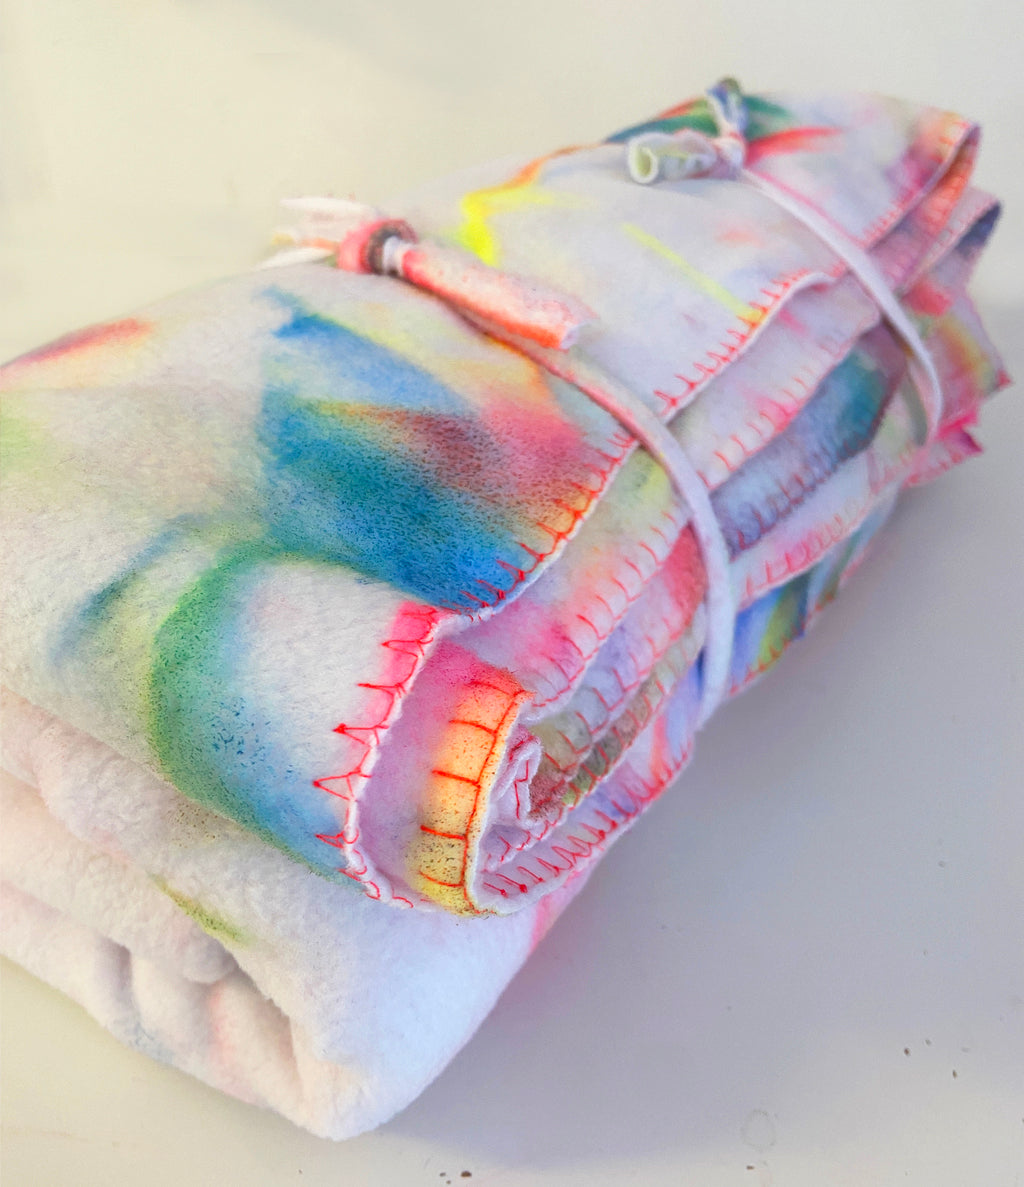 Binge watching will never be the same with this hand dyed fleece blanket! With the iconic heart on the front Size: 180cm x150cm, Fleece deken, comfi, chill, fleece kleed, neon roze, handmade in Amsterdam